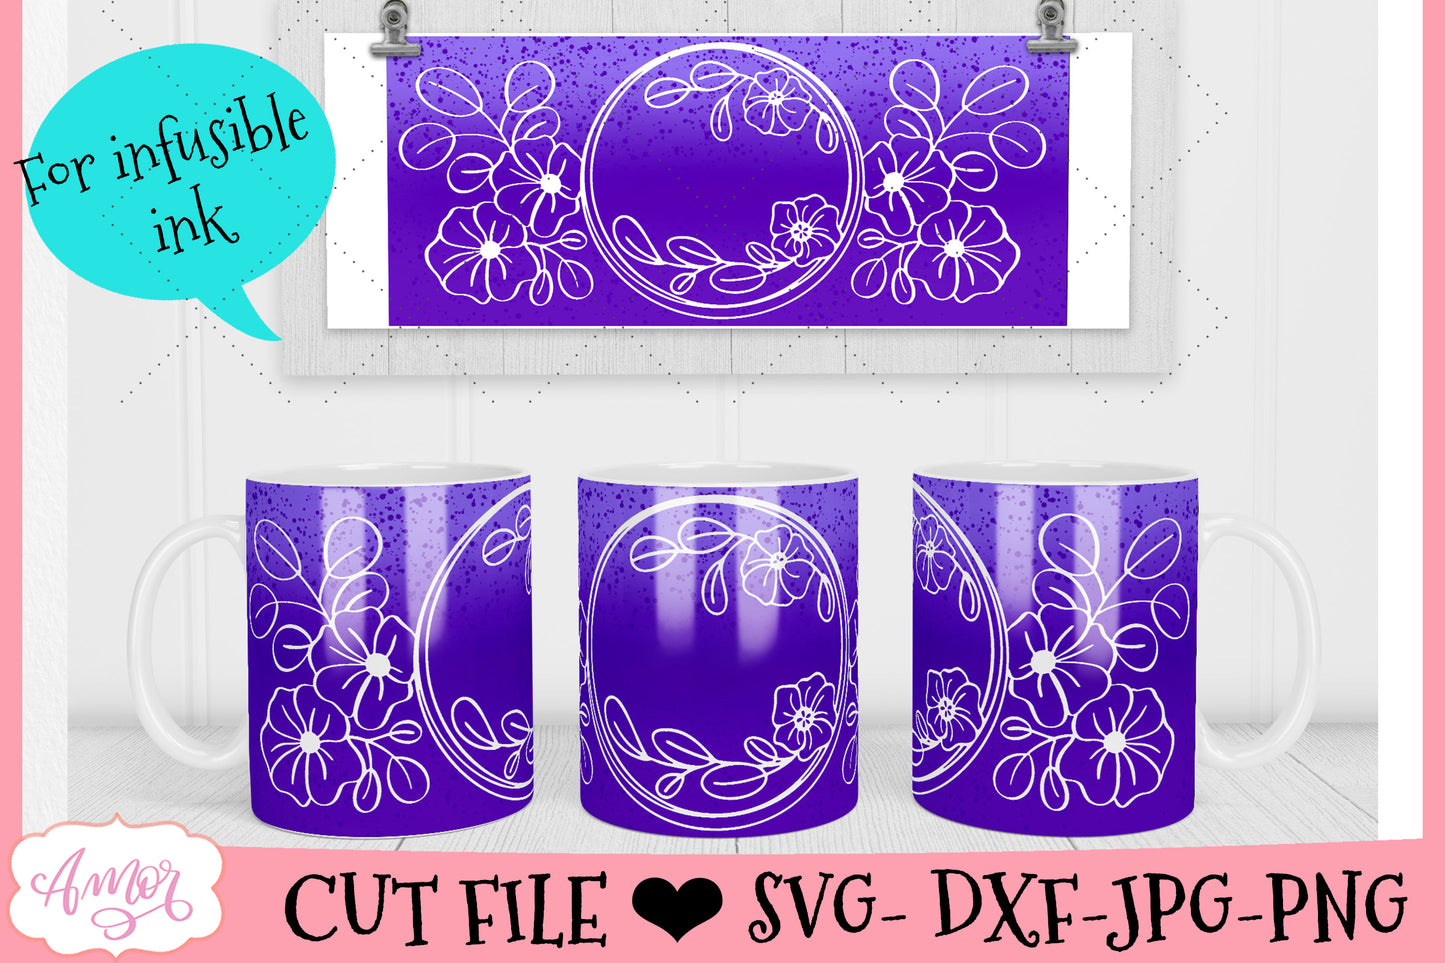 Customizable Floral Mug Wrap SVG for Cricut infusible ink